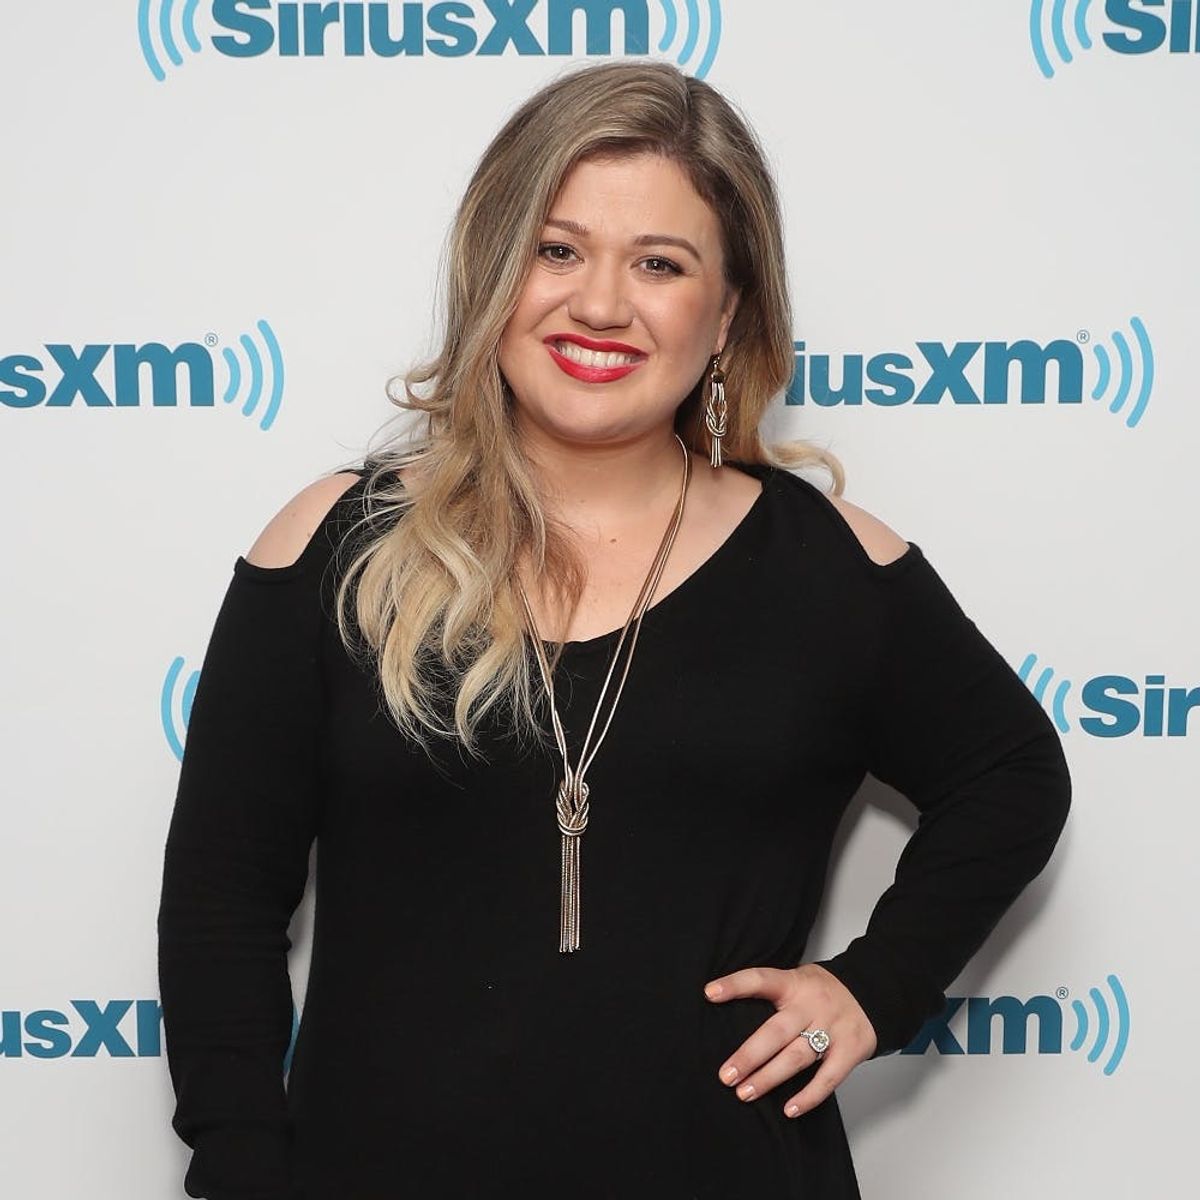 Kelly Clarkson Joins a Reality TV Singing Competition But It’s NOT American Idol